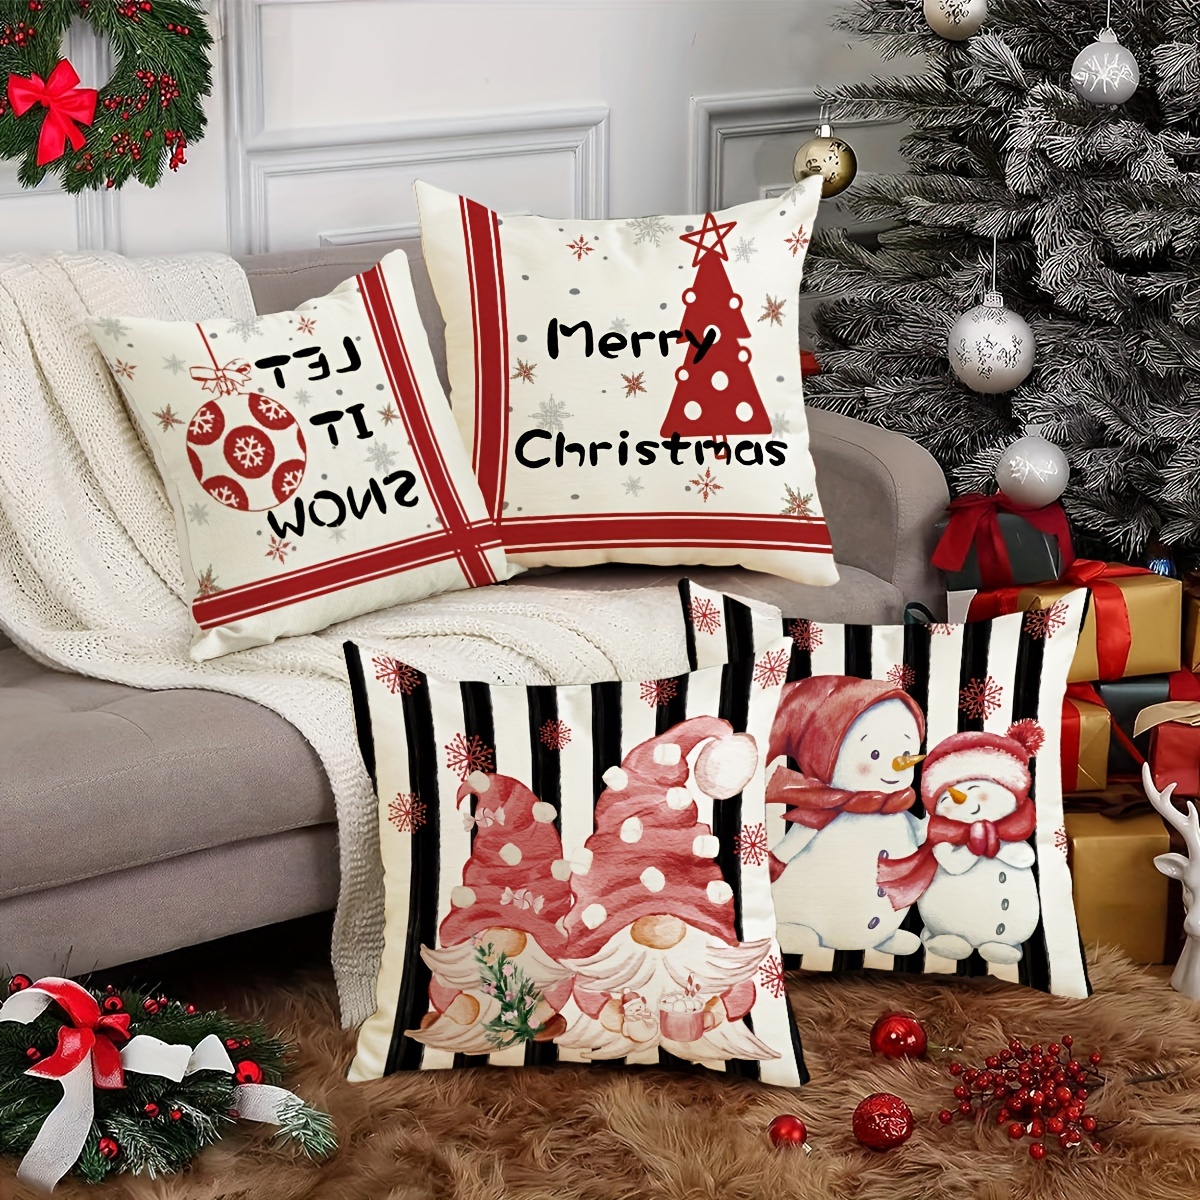 Christmas Tree and Elk Printed Decorative Holiday Series Throw Pillow with Inserts, Red, 18 inch x 18 inch, Set of 4